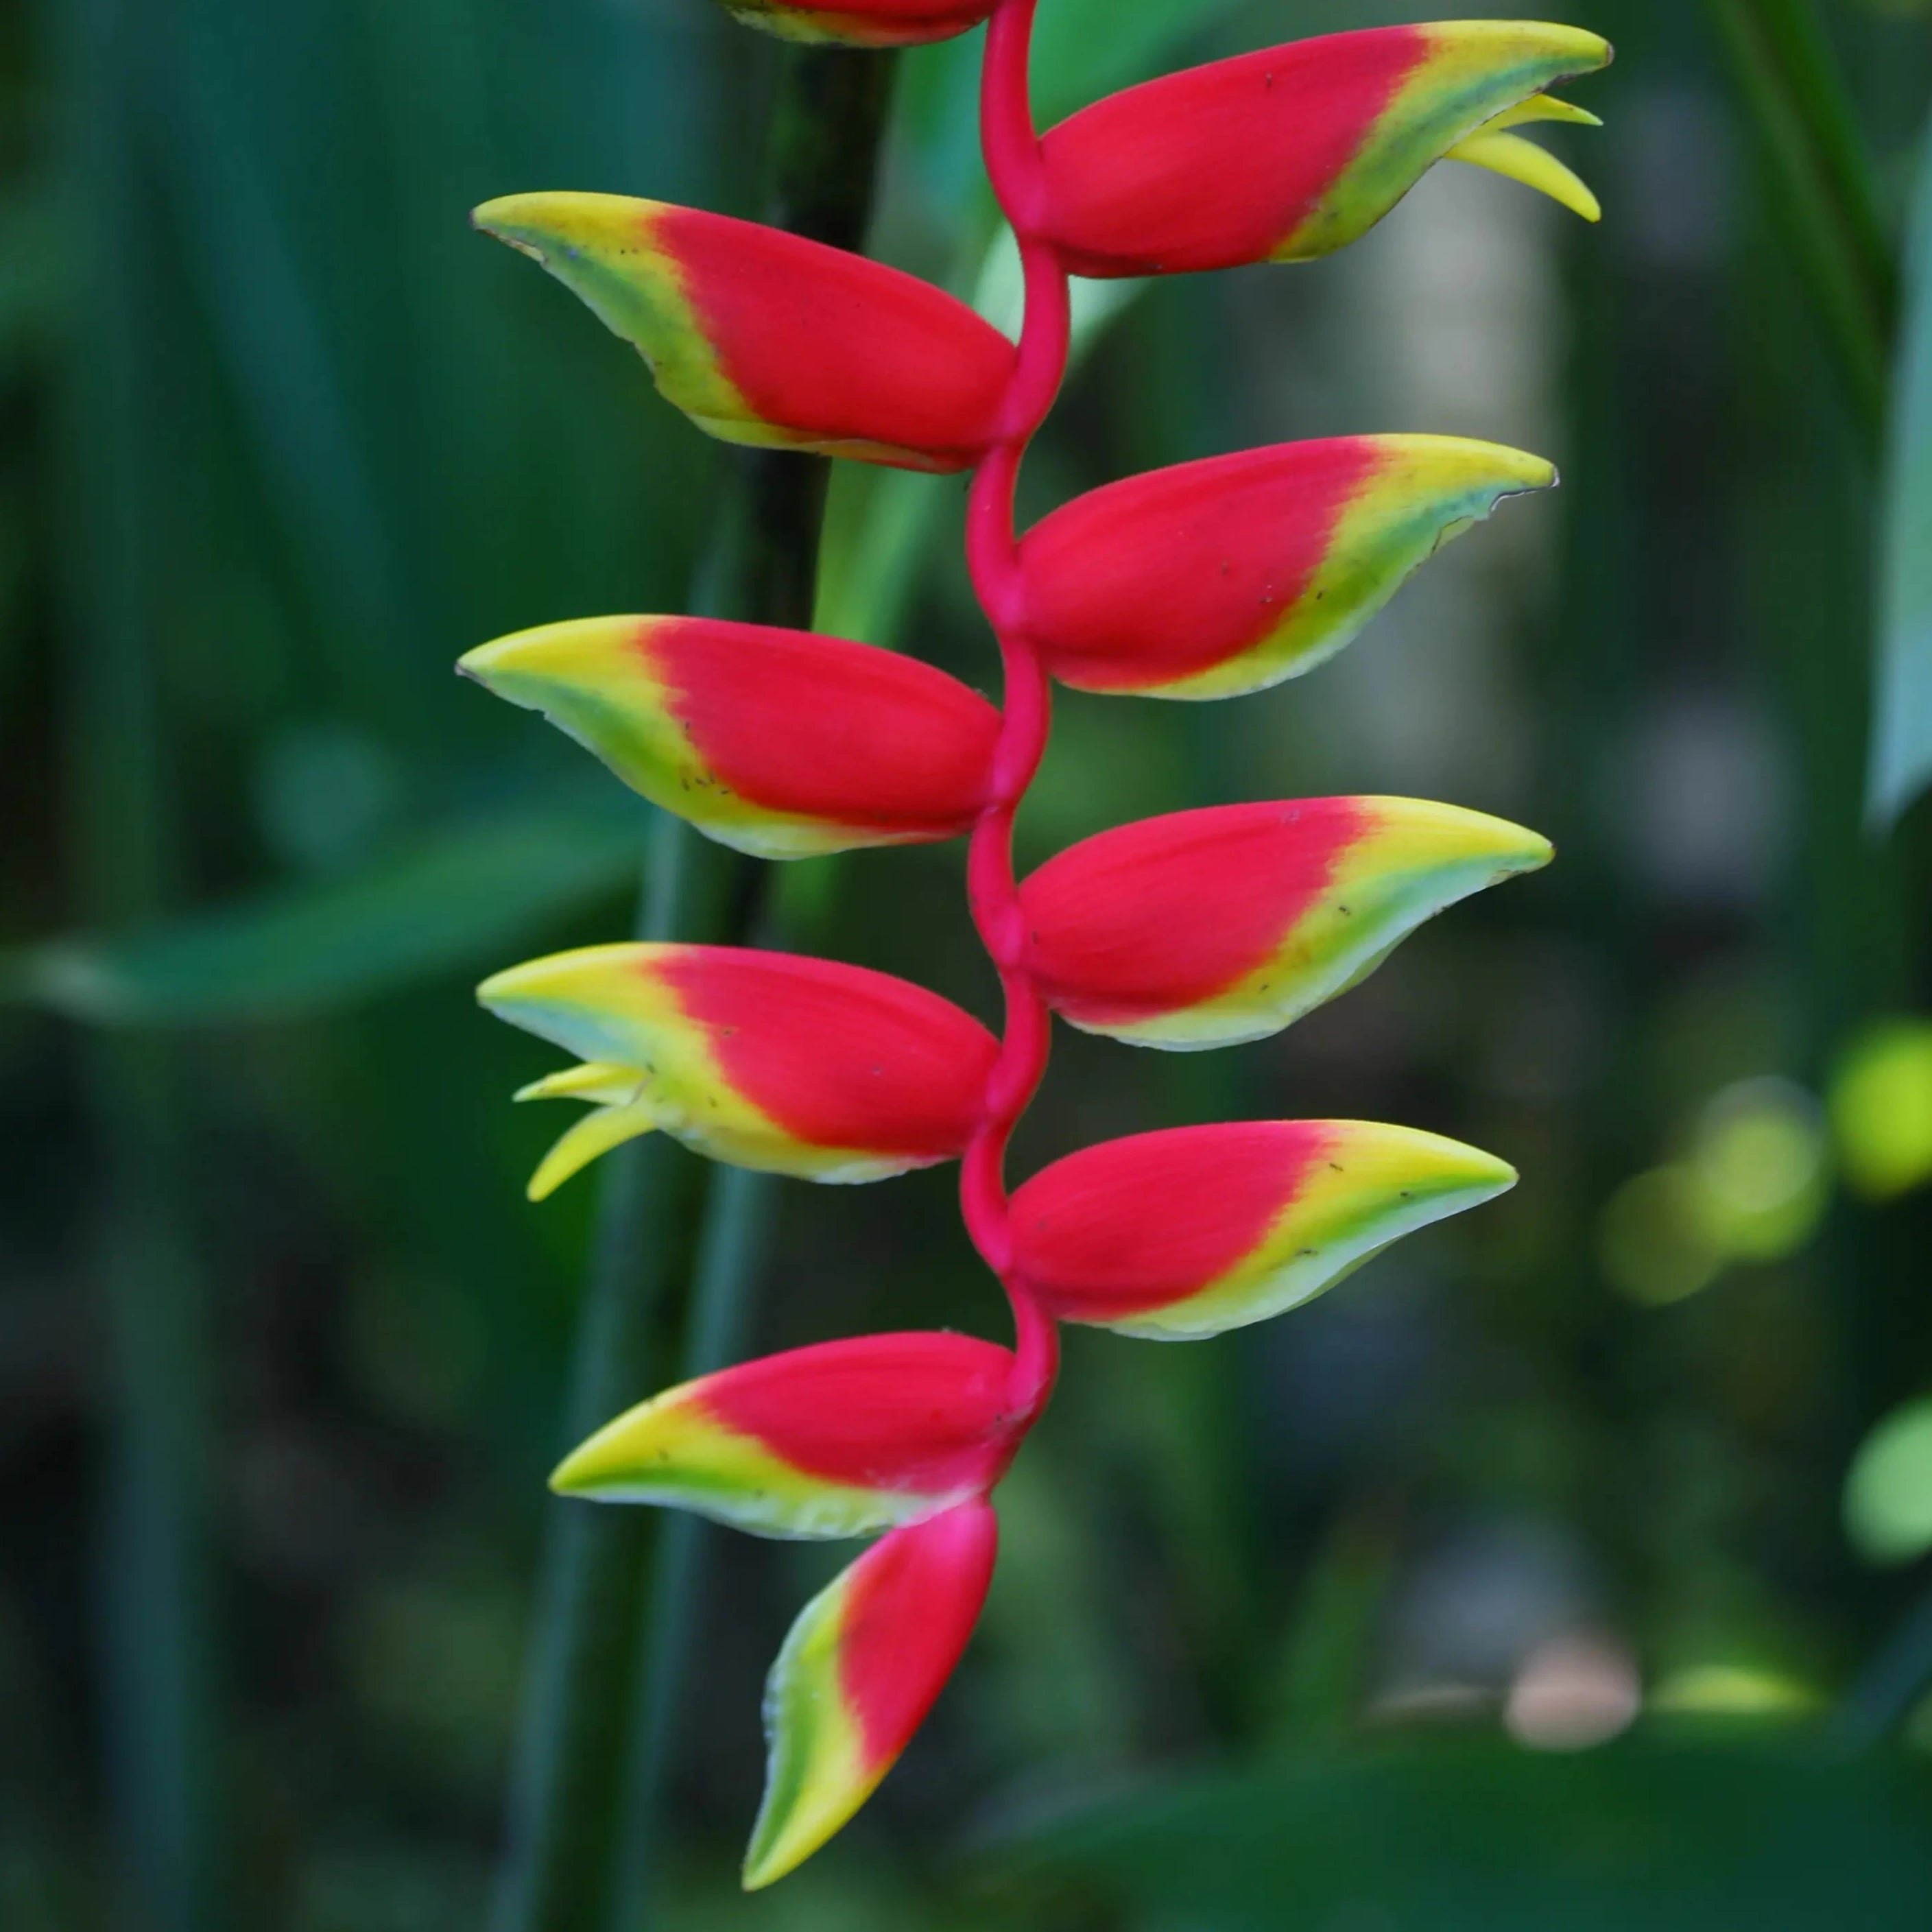 star of stage shows heliconia